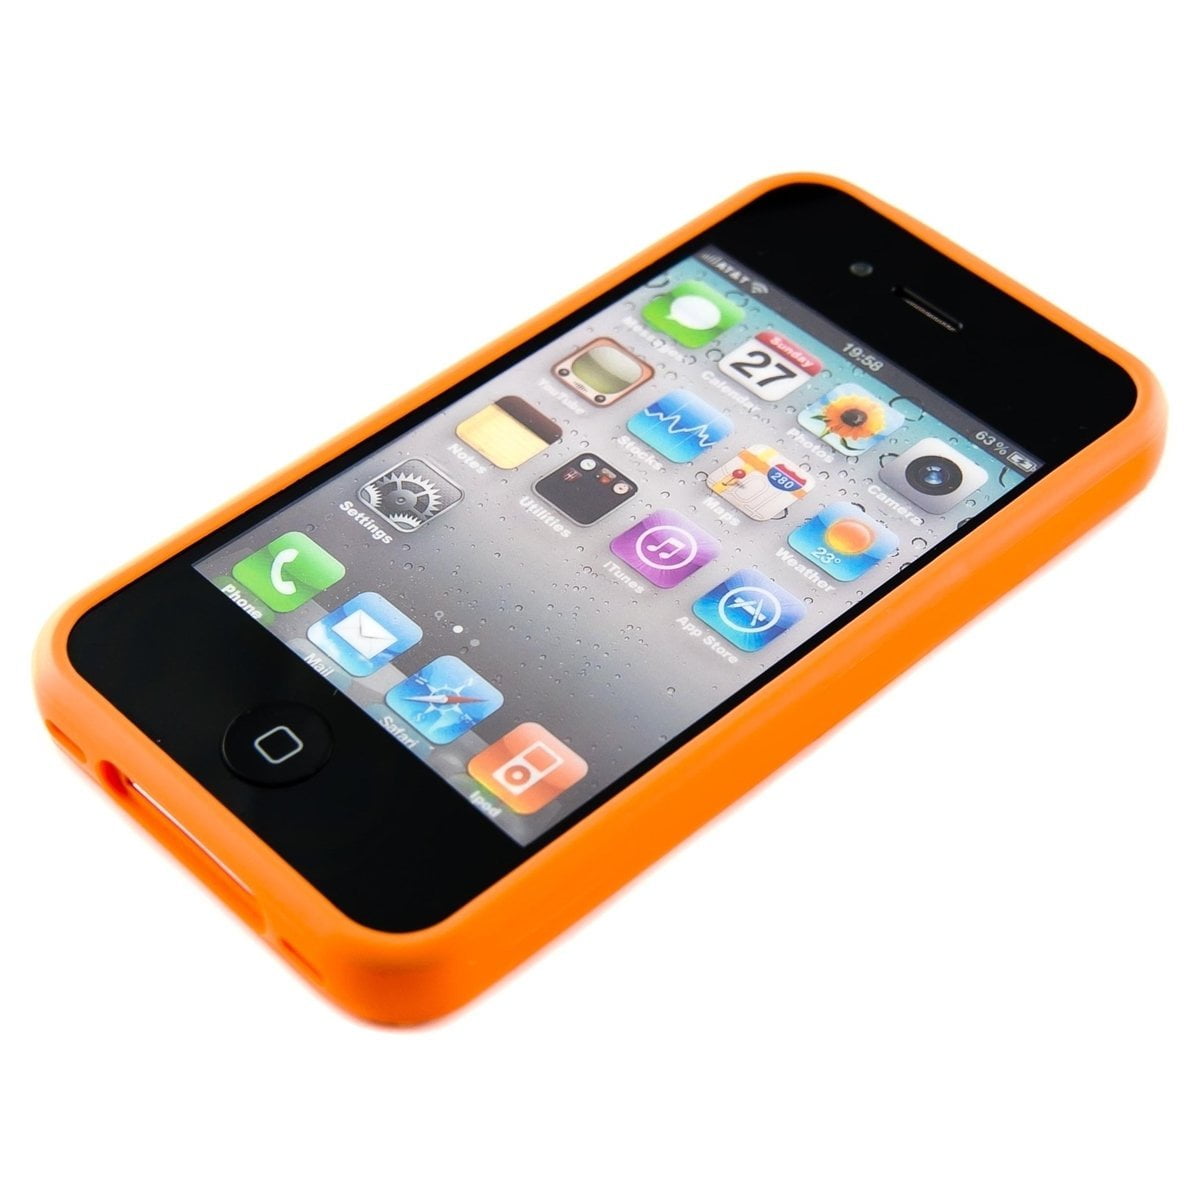 2-Tone Bumper Case with Chrome Buttons for iPhone 4 / - Orange - Walmart.com